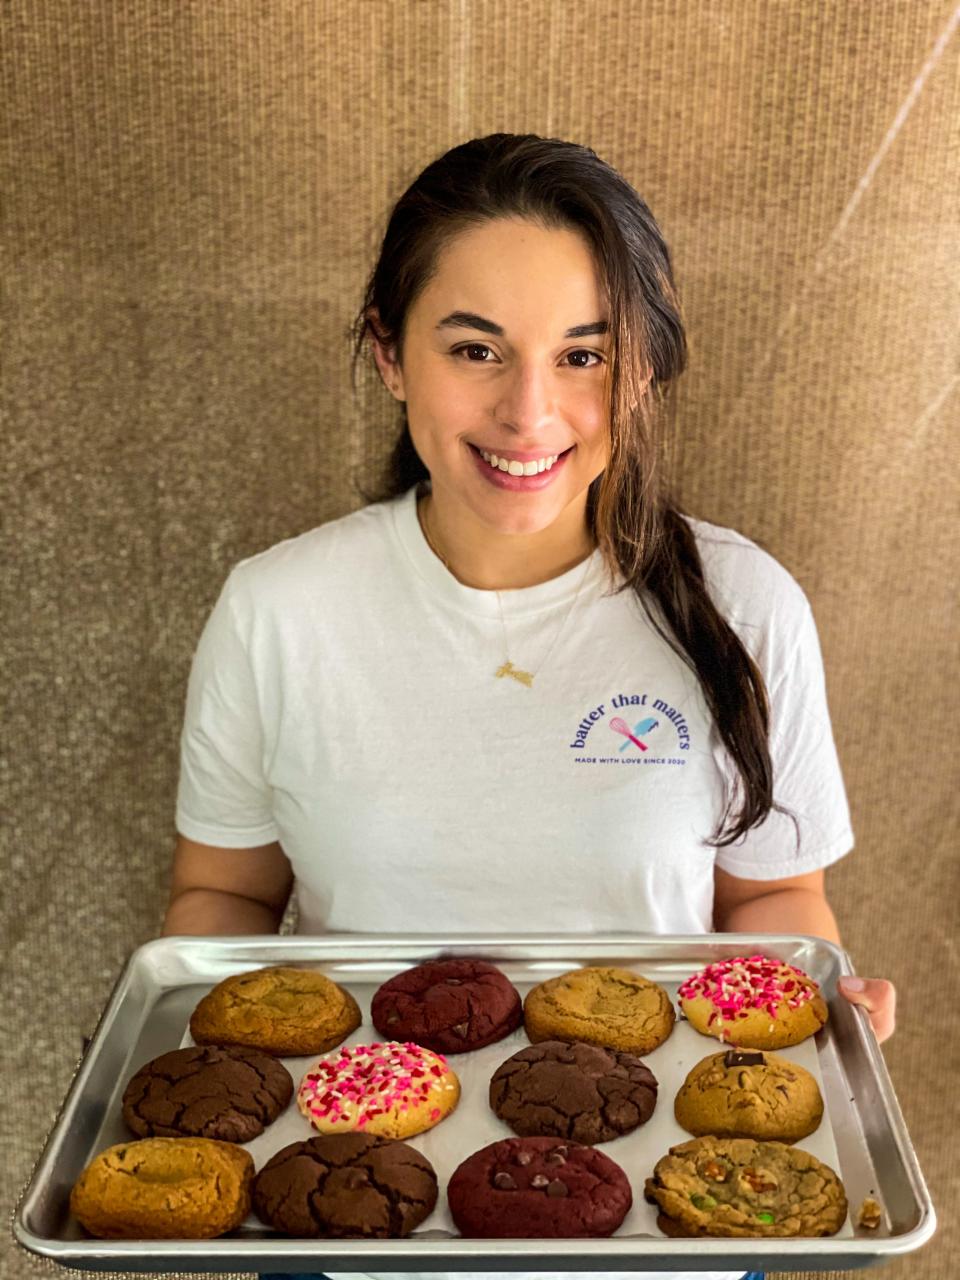 Bedford resident Amanda Palomino, daughter of Chef Rafael Palomino of Sonora in Port Chester fame, has launched her own cookie business: Batter That Matters.